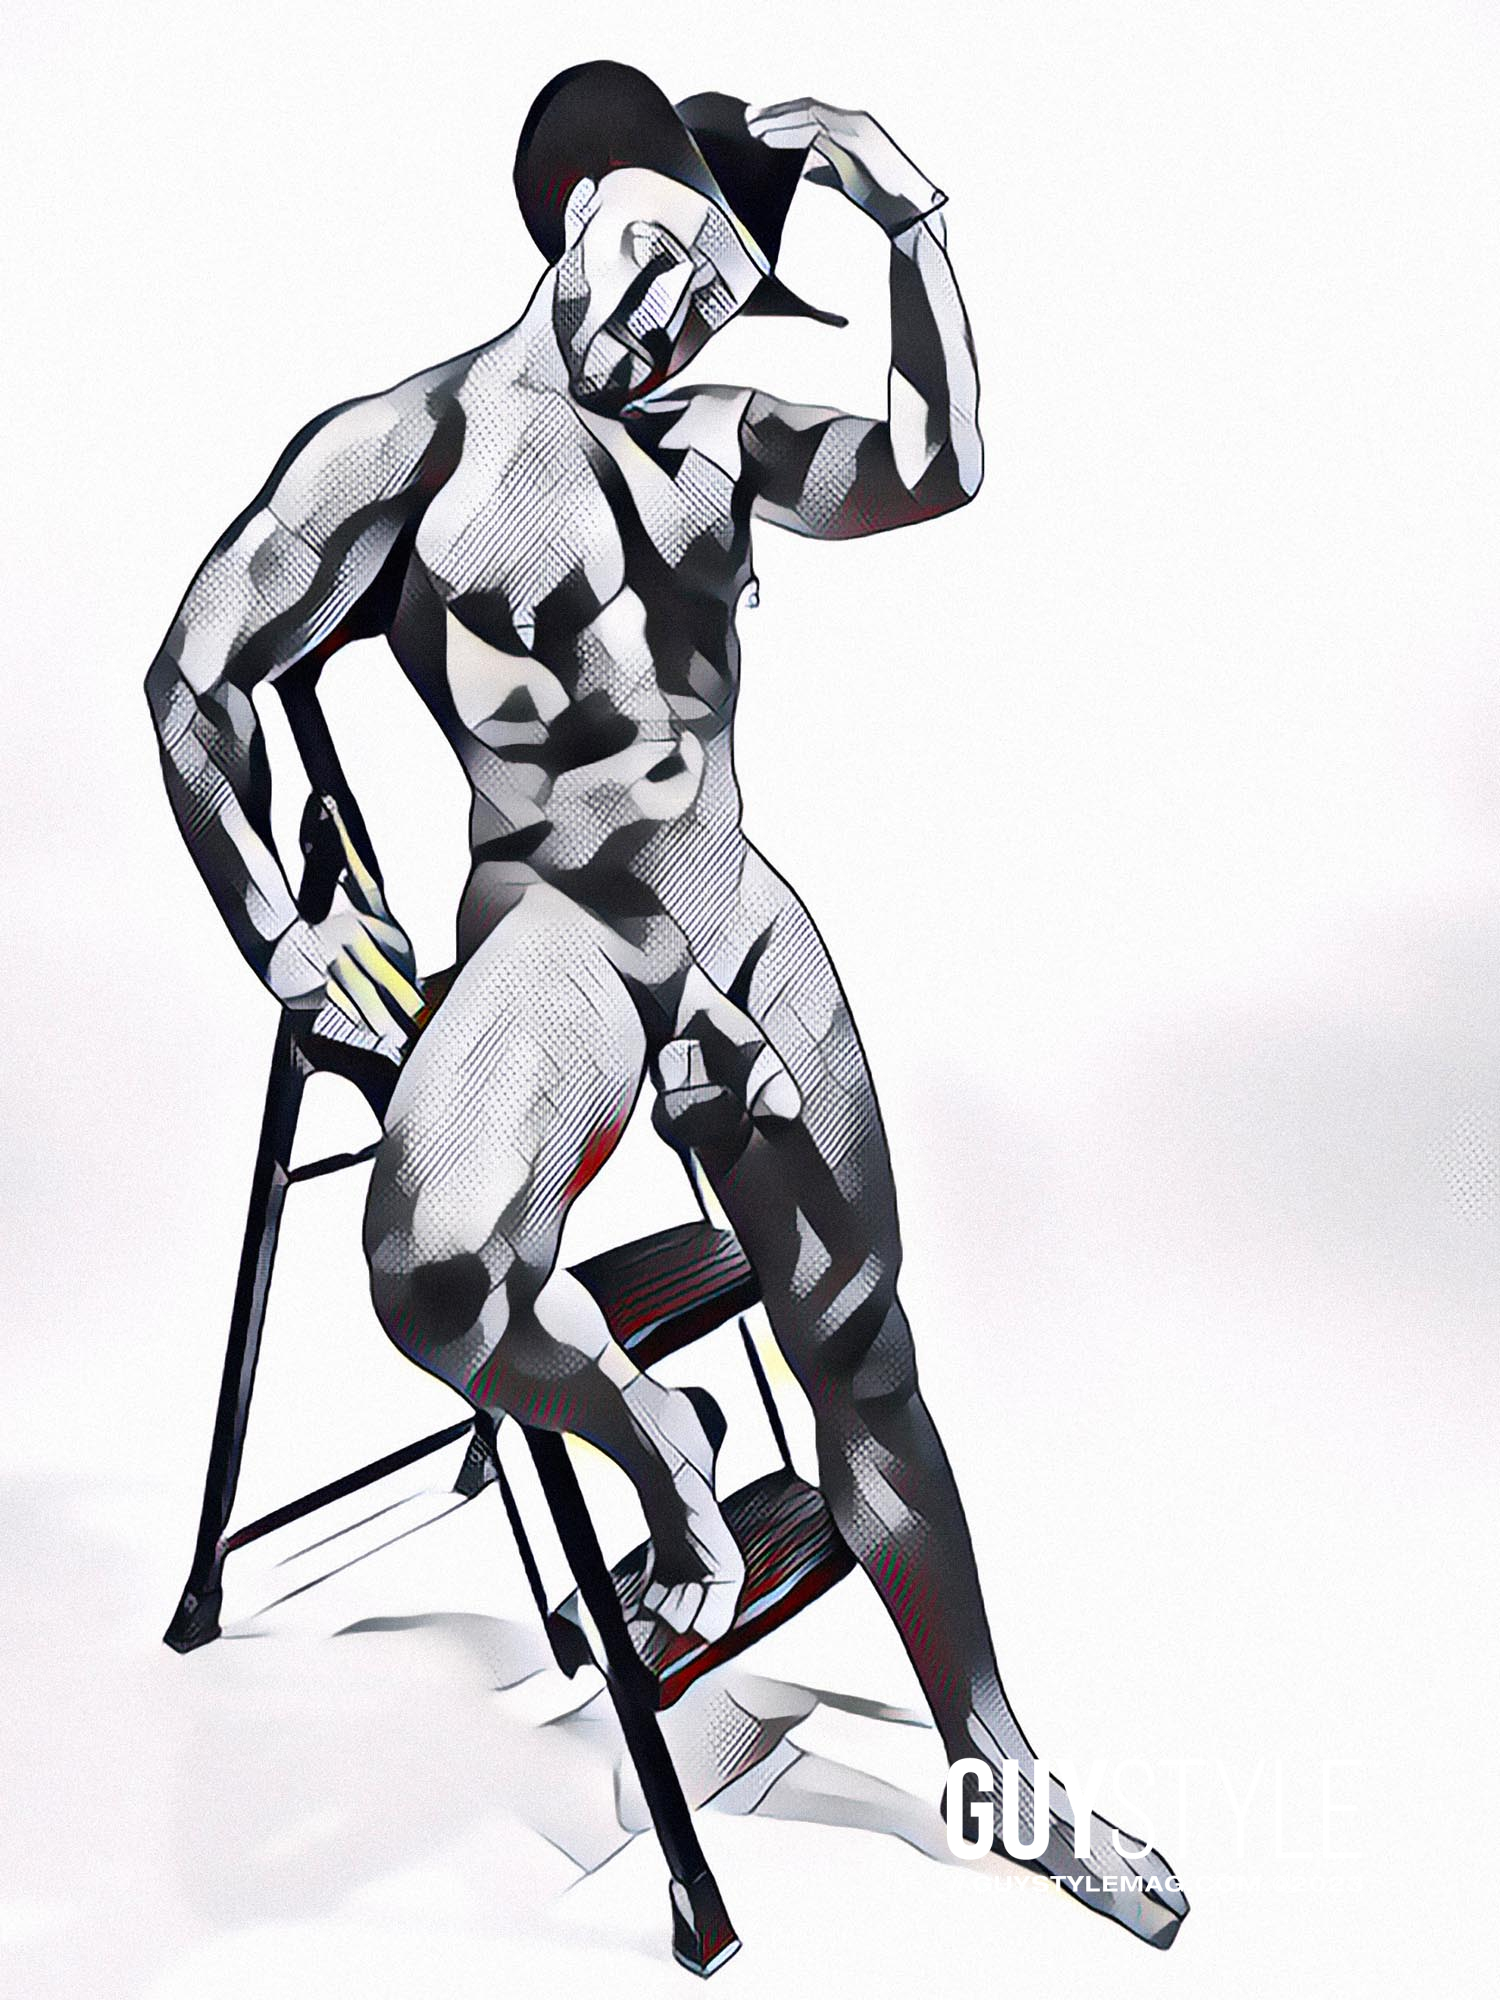 Gay Art for Sale: The Evolution of Homoerotic Art in NYC and the Inspiring Journey of Maxwell Alexander - Best Gay Art – Famous Gay Art – Homoerotic Art – Phallic Art 